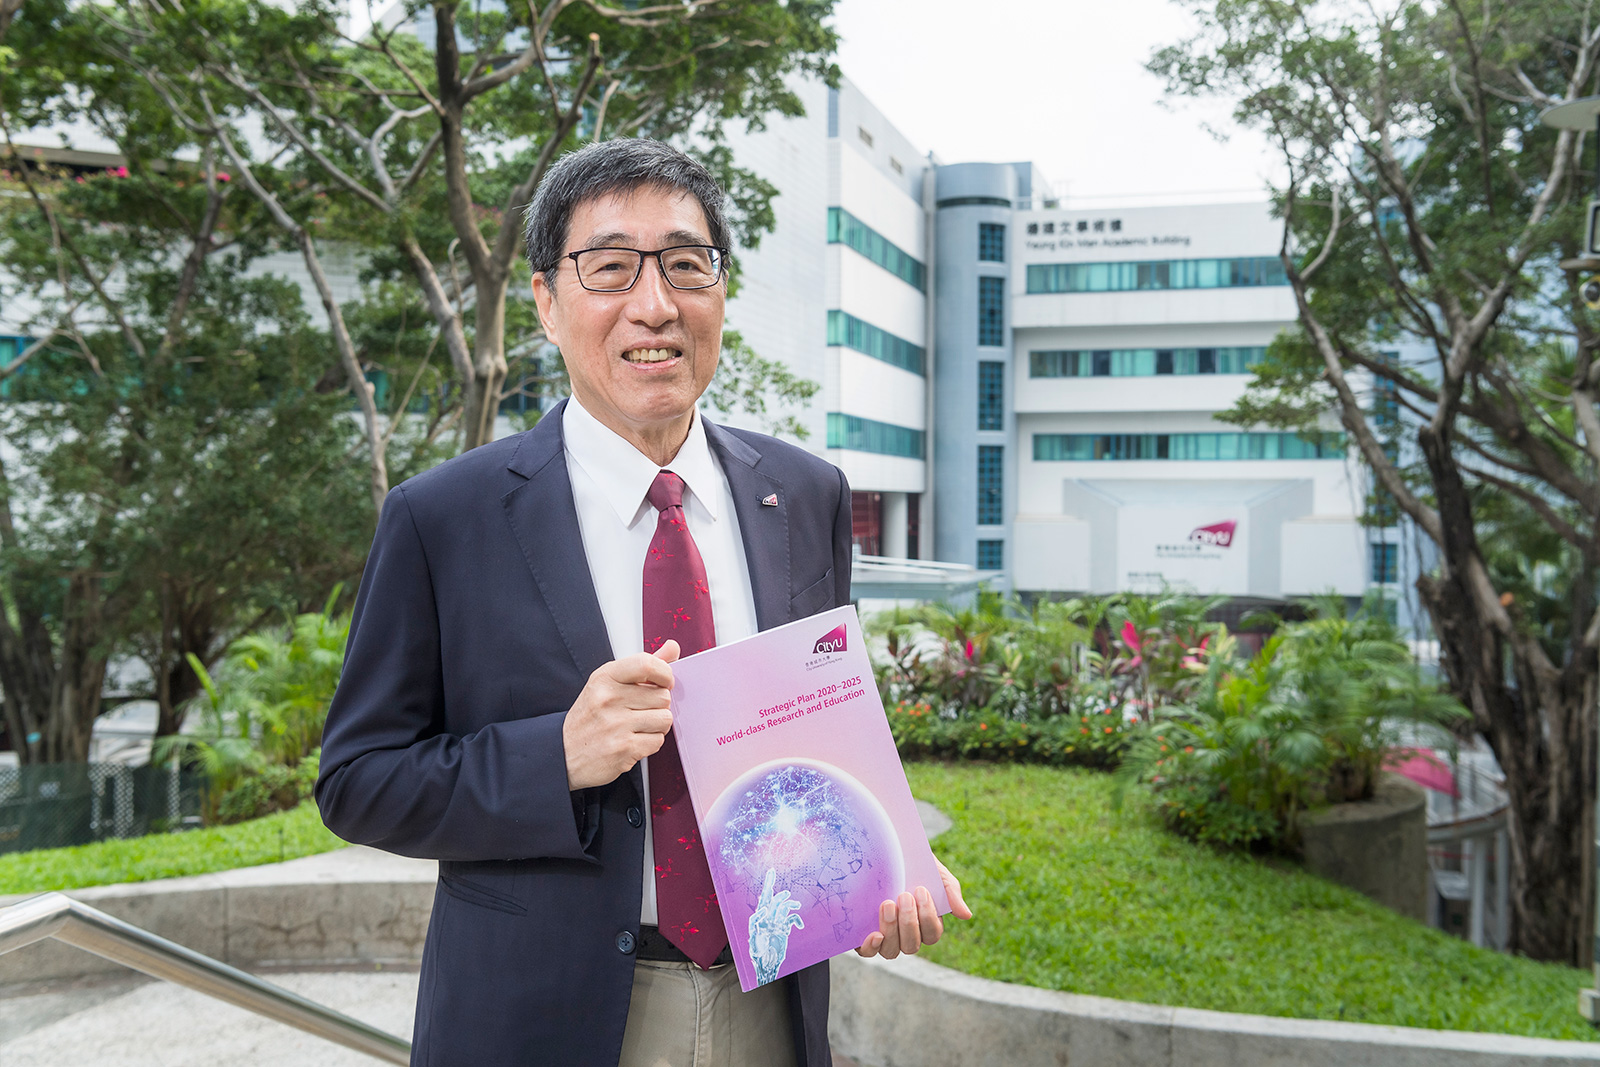 President Way Kuo, CityU President, says the new Plan serves as a roadmap for raising CityU’s levels of excellence in research and education and bringing benefits to the world.